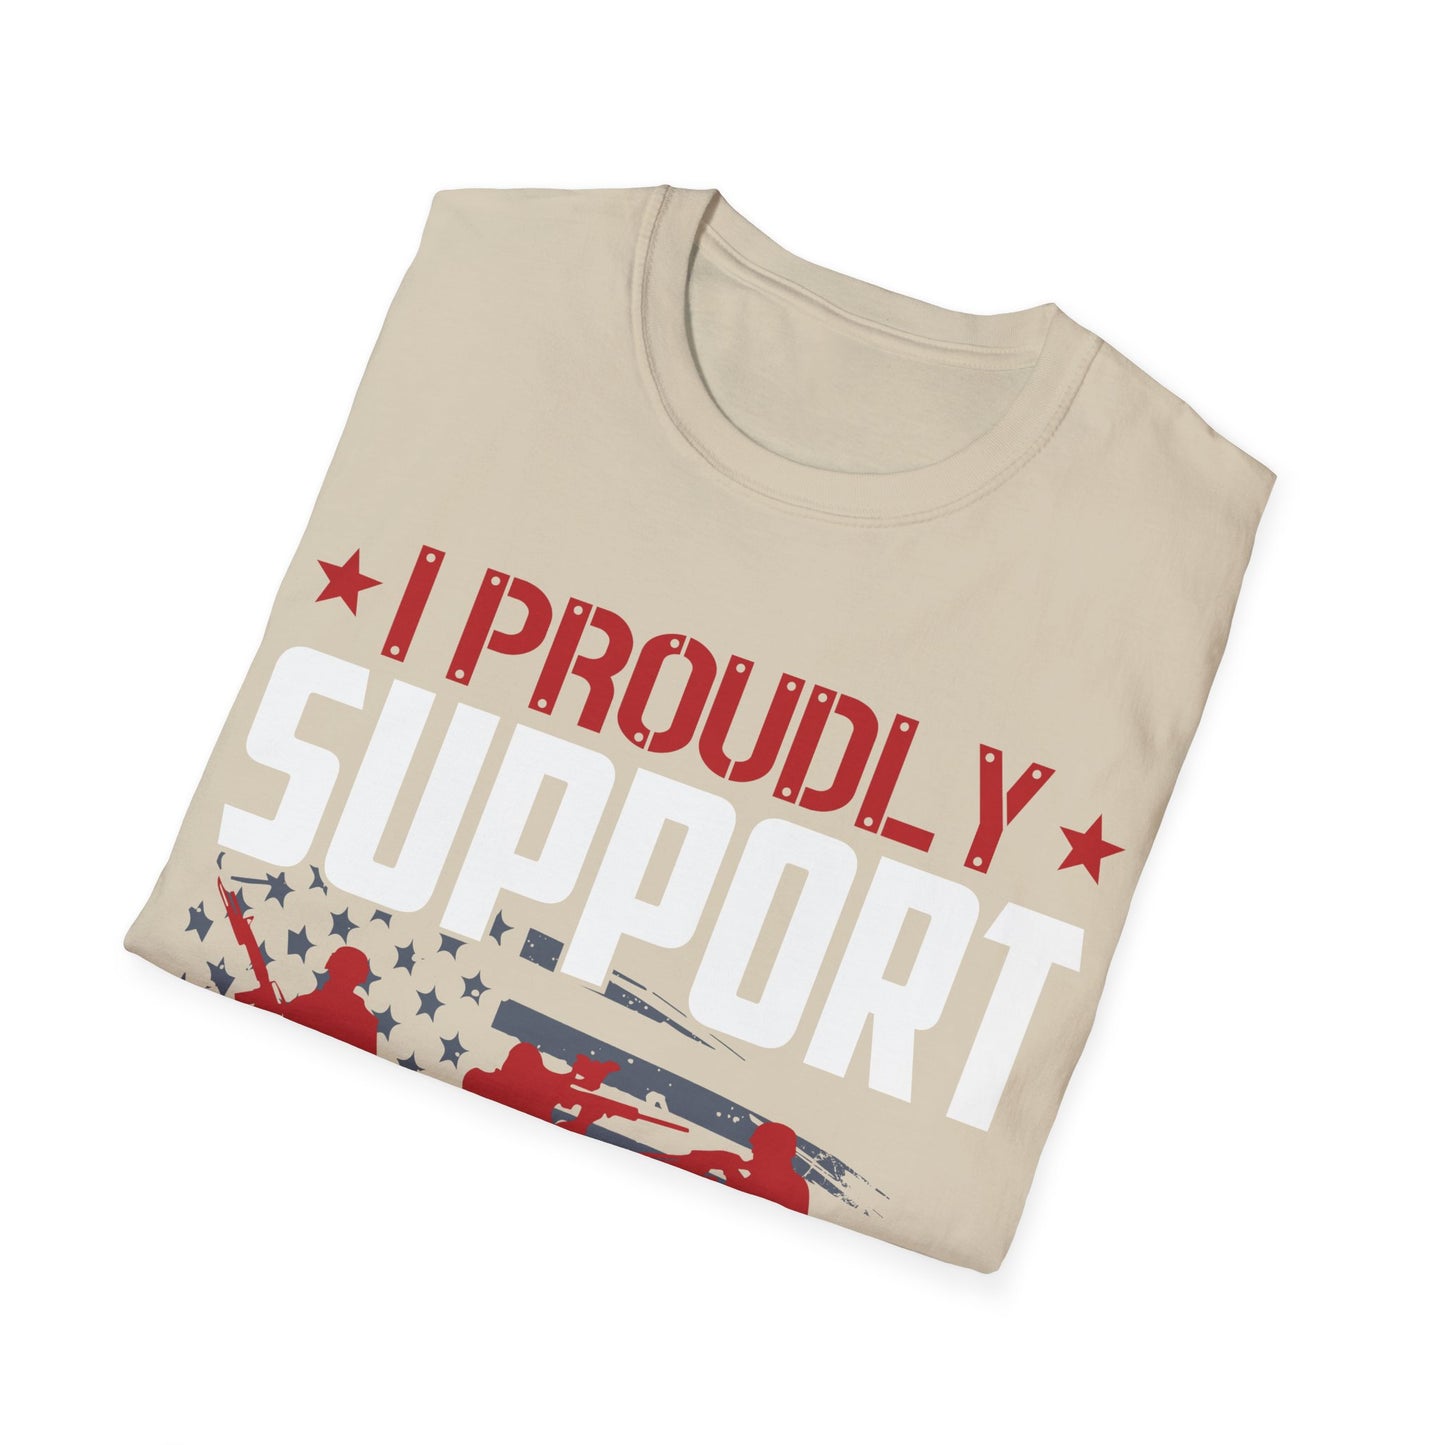 Proudly Support - Unisex Softstyle T-Shirt